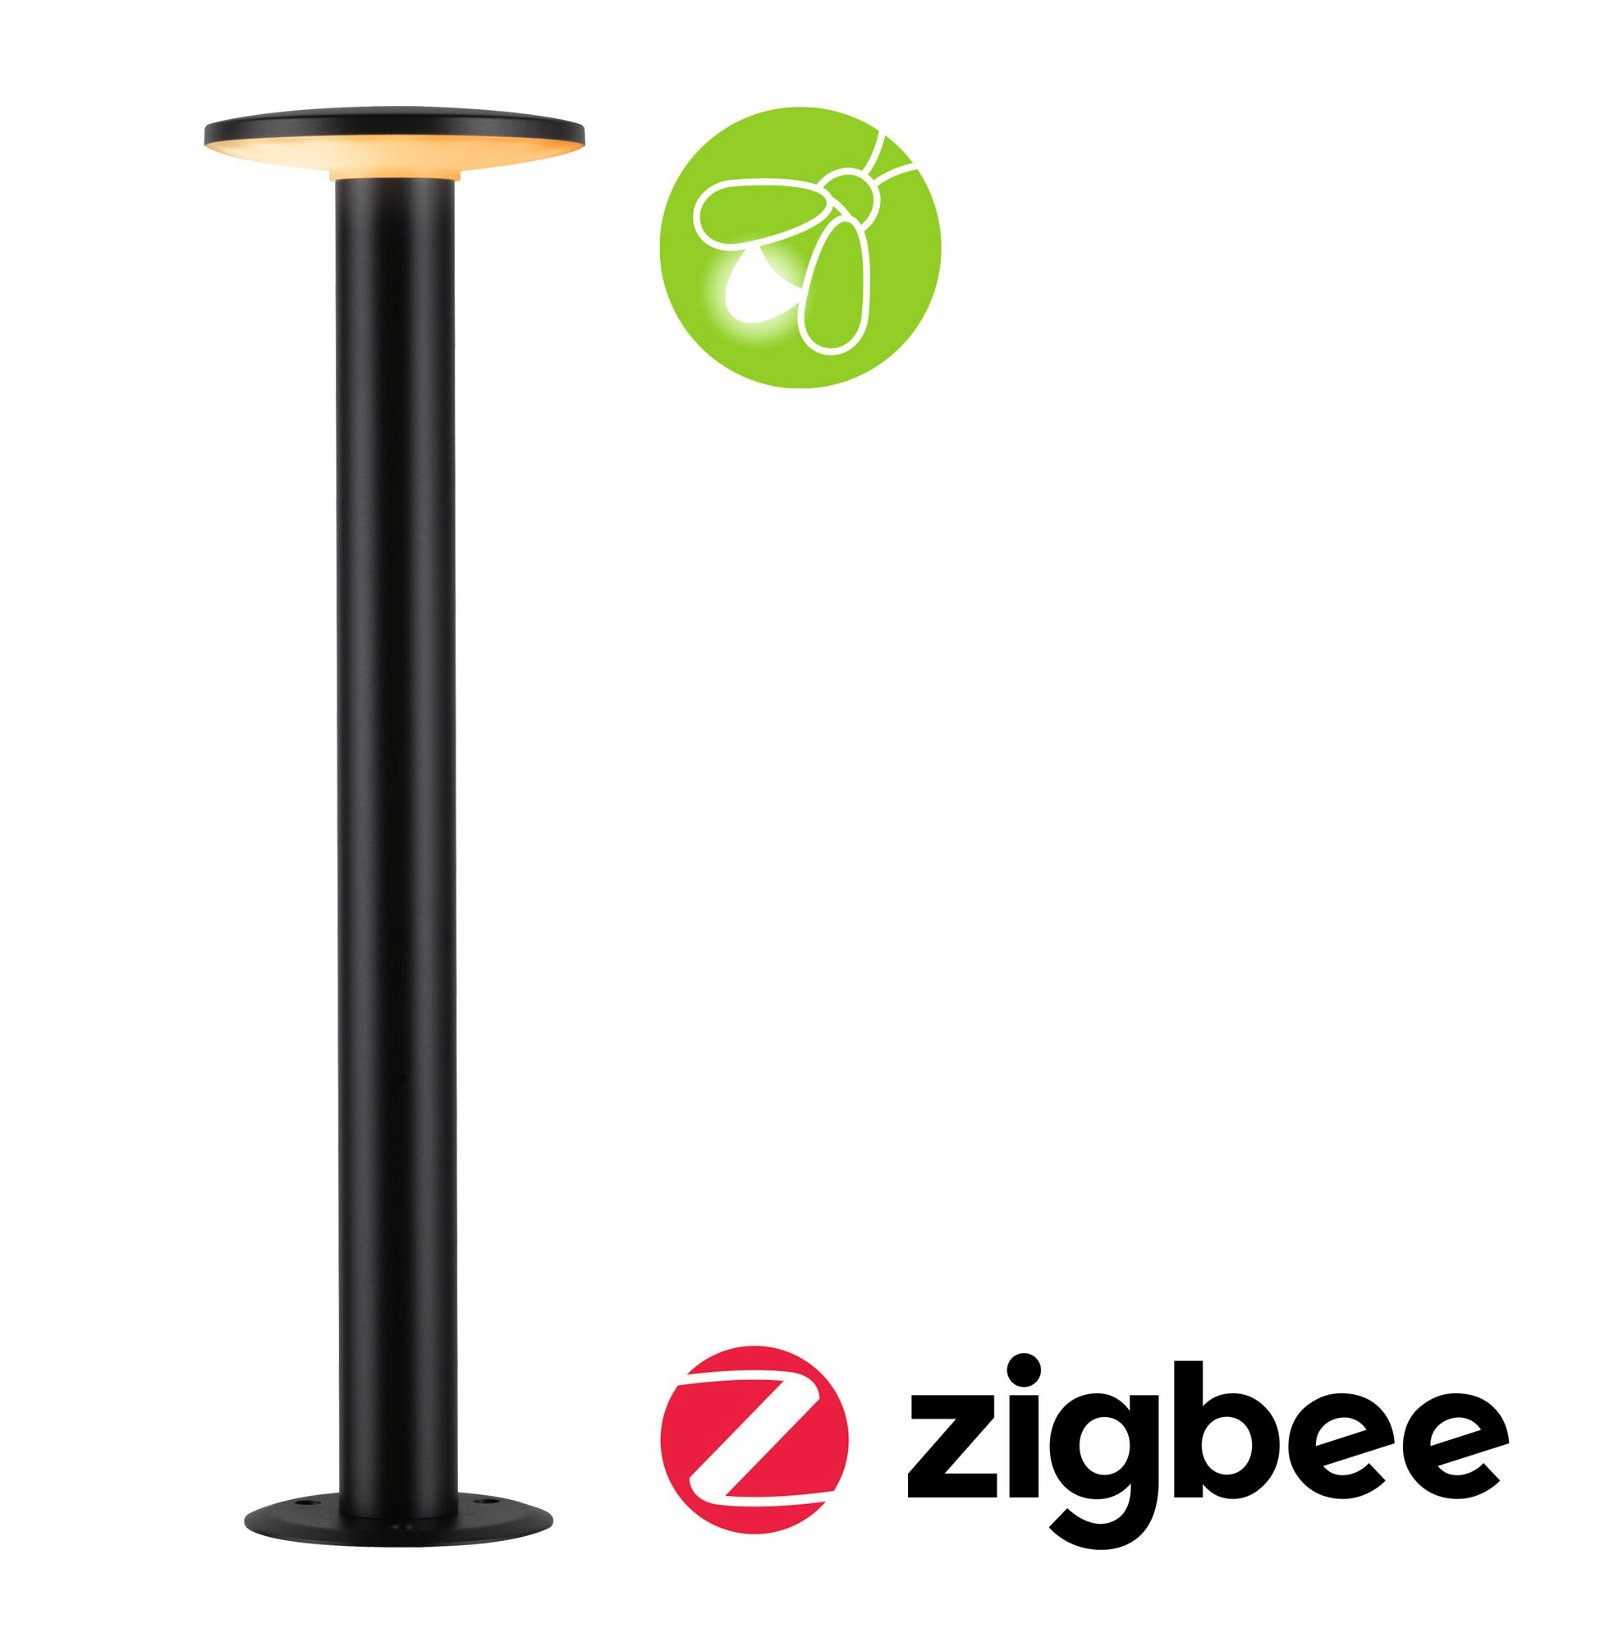 LED Bollard luminaire Smart Home Zigbee Plate insect friendly\n IP44 600mm Tunable Warm 5,5W 280lm 230V Anthracite Metal/Plastic